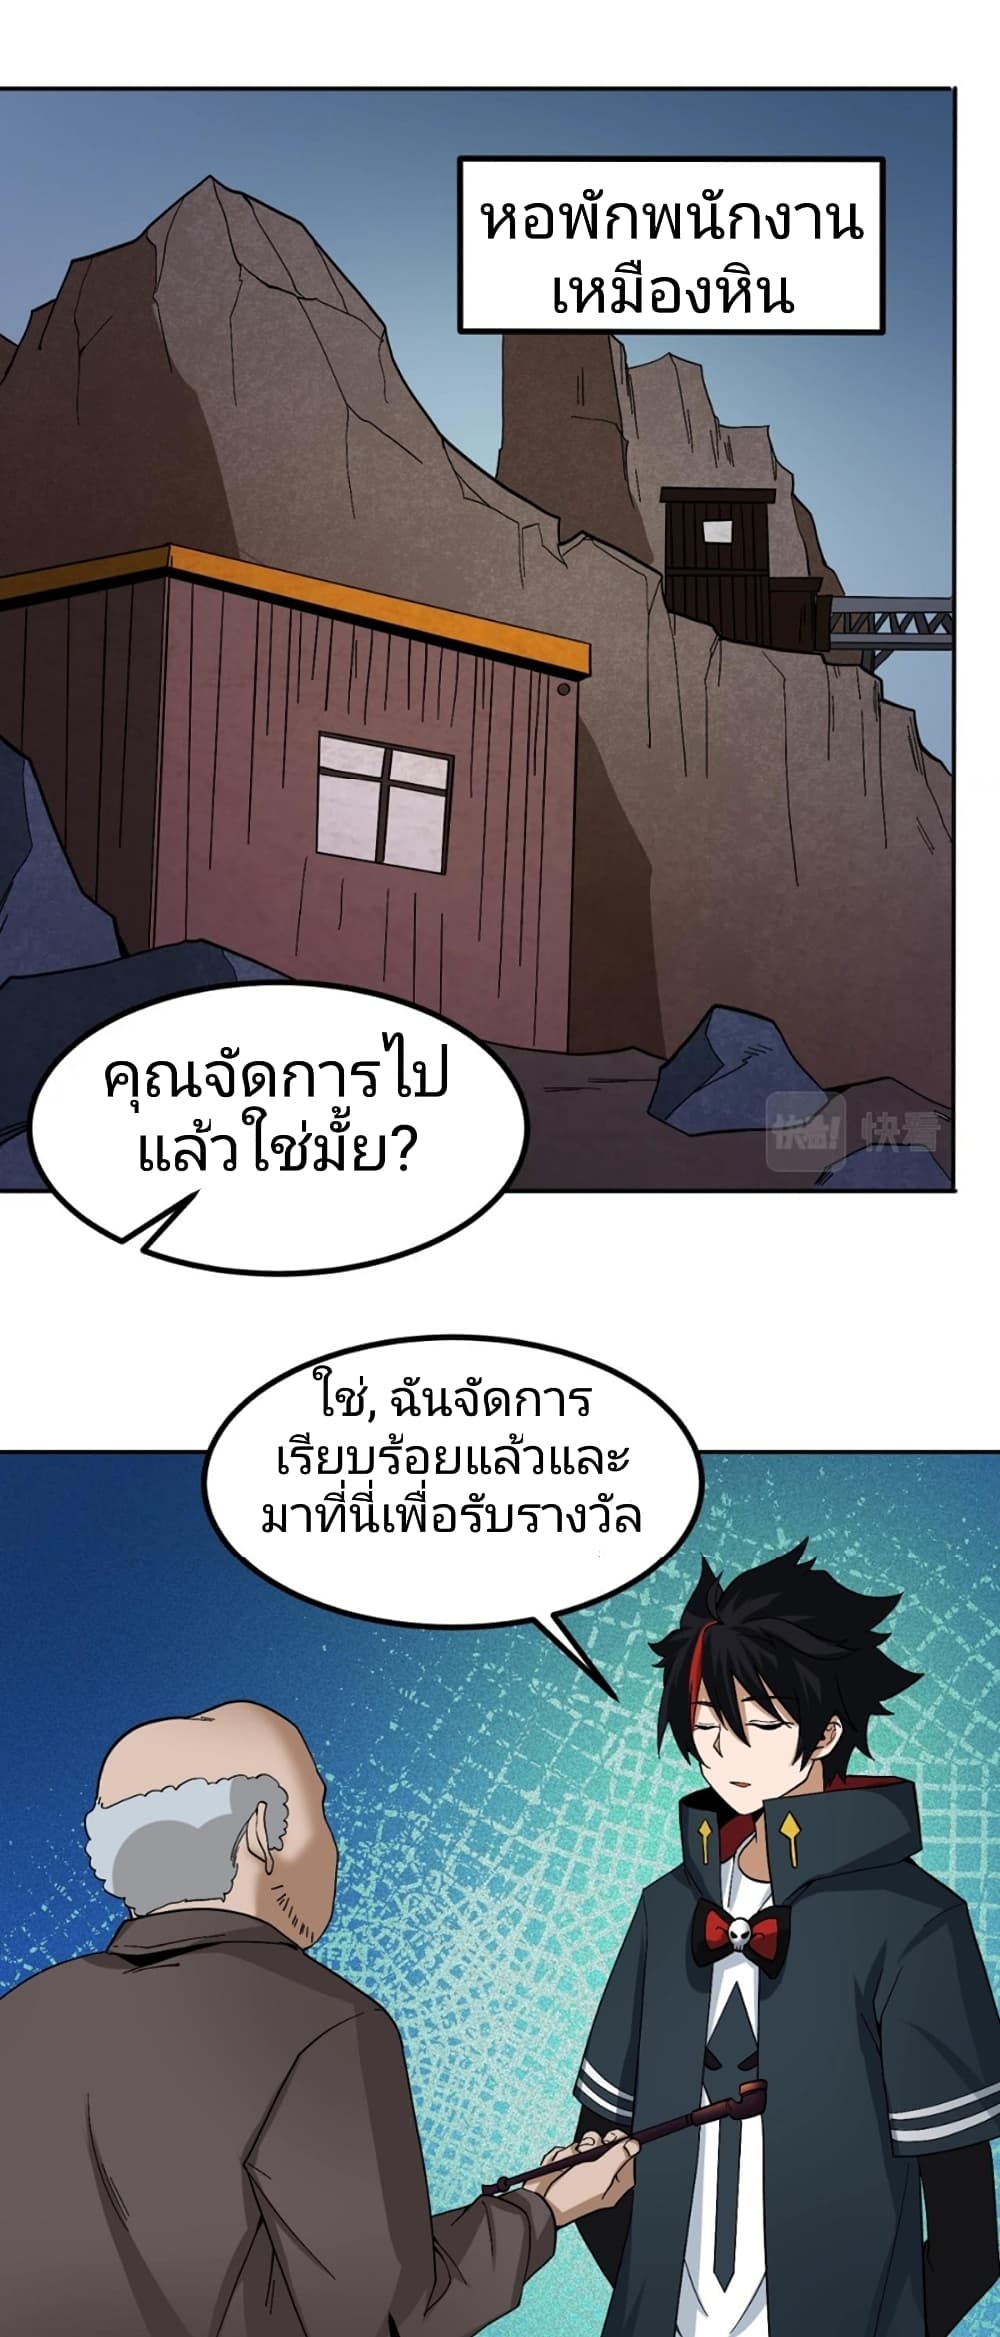 The Age of Ghost Spirits à¸à¸­à¸à¸à¸µà¹ 9 (30)